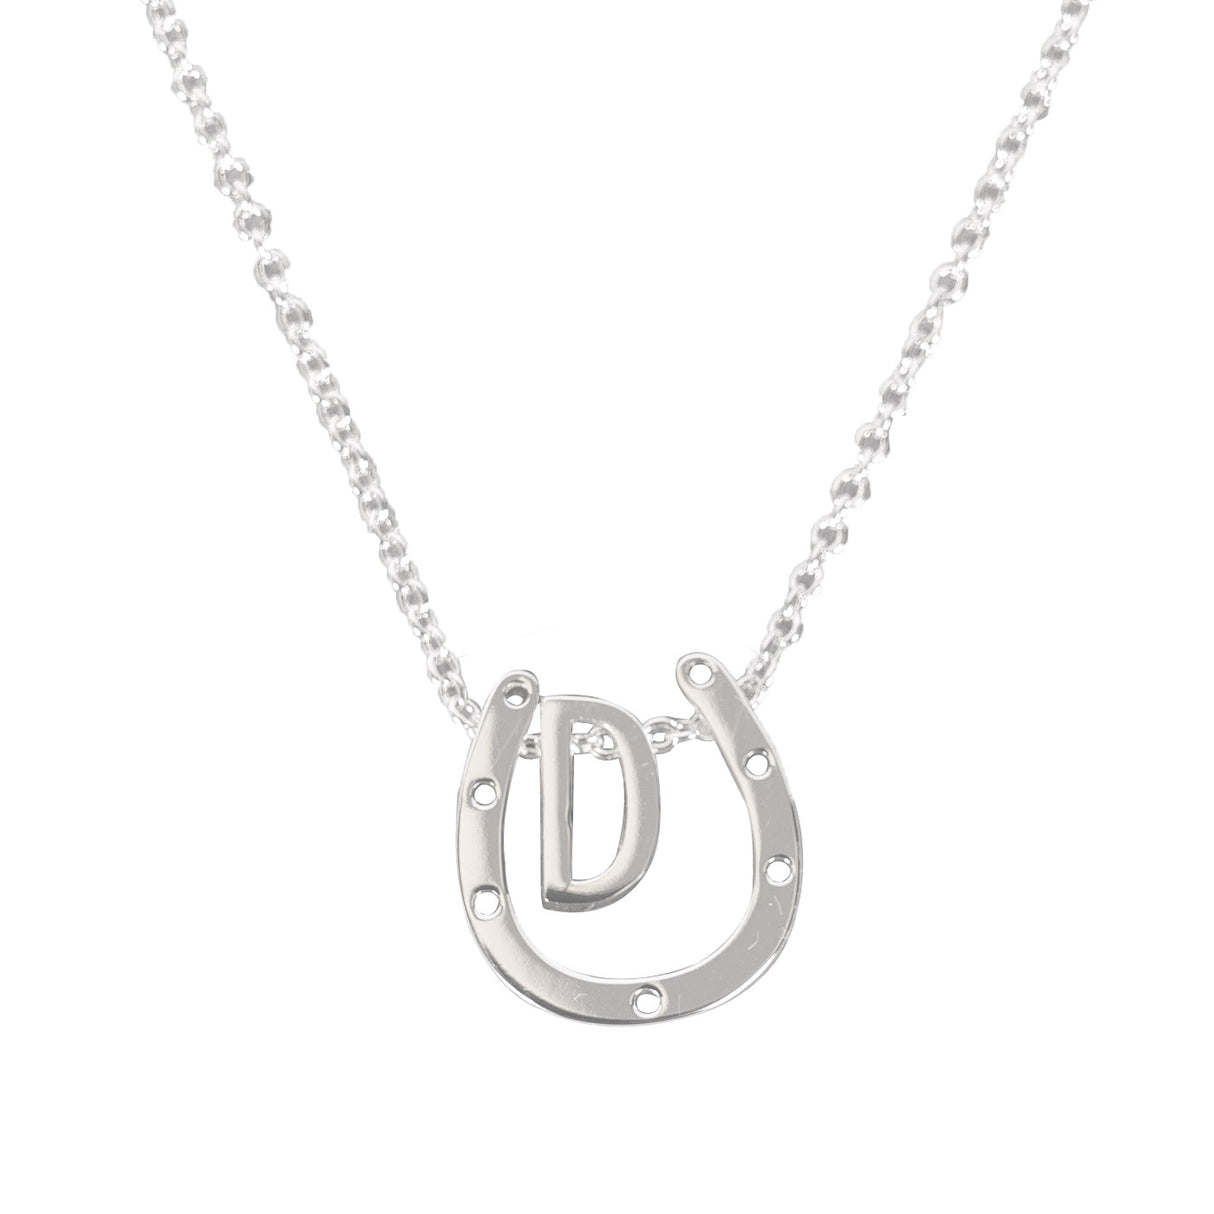 Cinto by Kelly Herd D Horseshoe Pendant Necklace